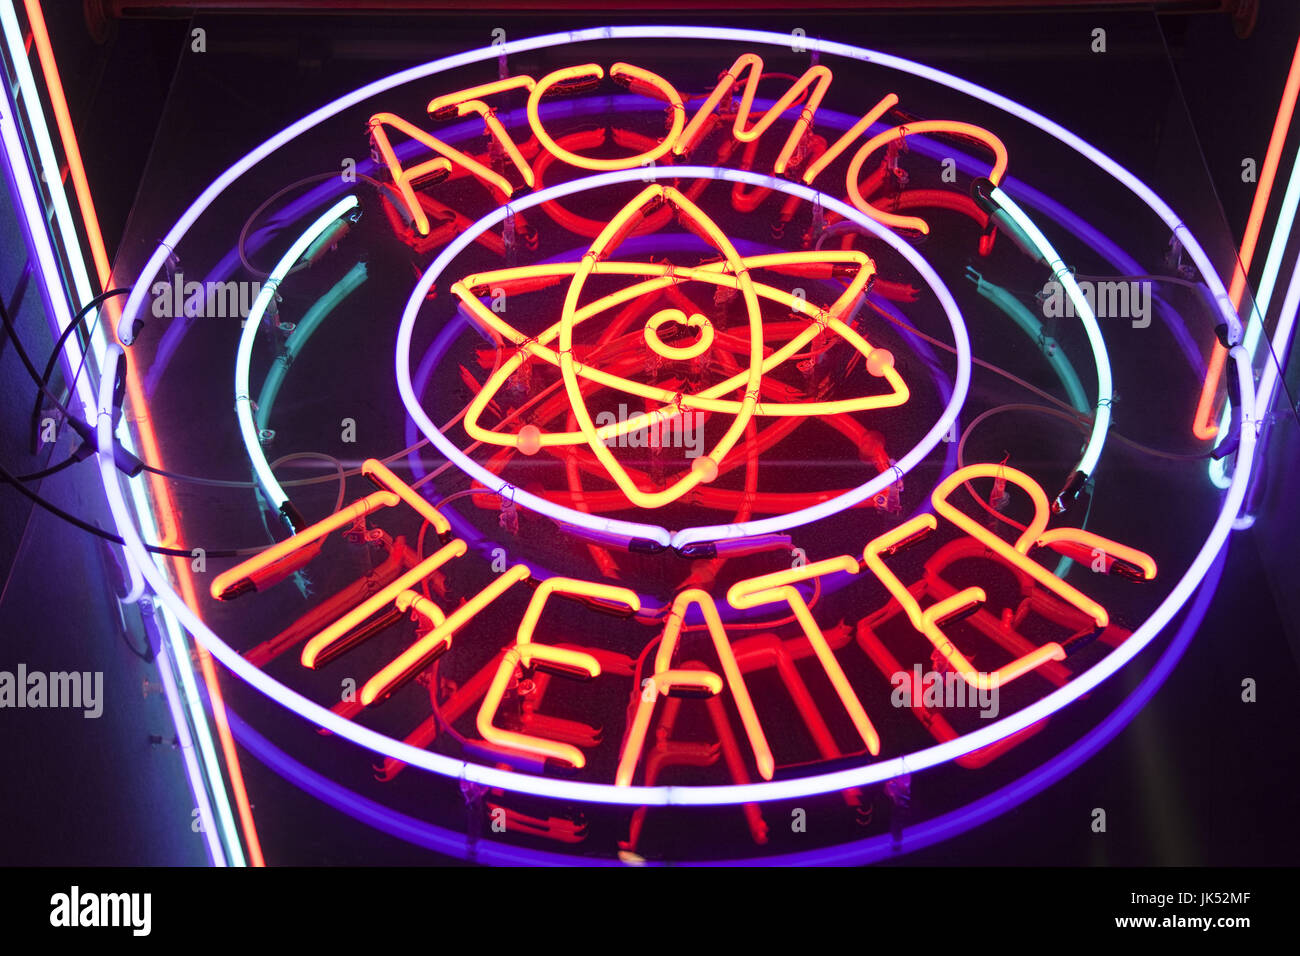 USA, Tennessee, Oakridge, American Museum of Science and Energy, AMSE, Manhattan Project, Atomic Theater sign Stock Photo